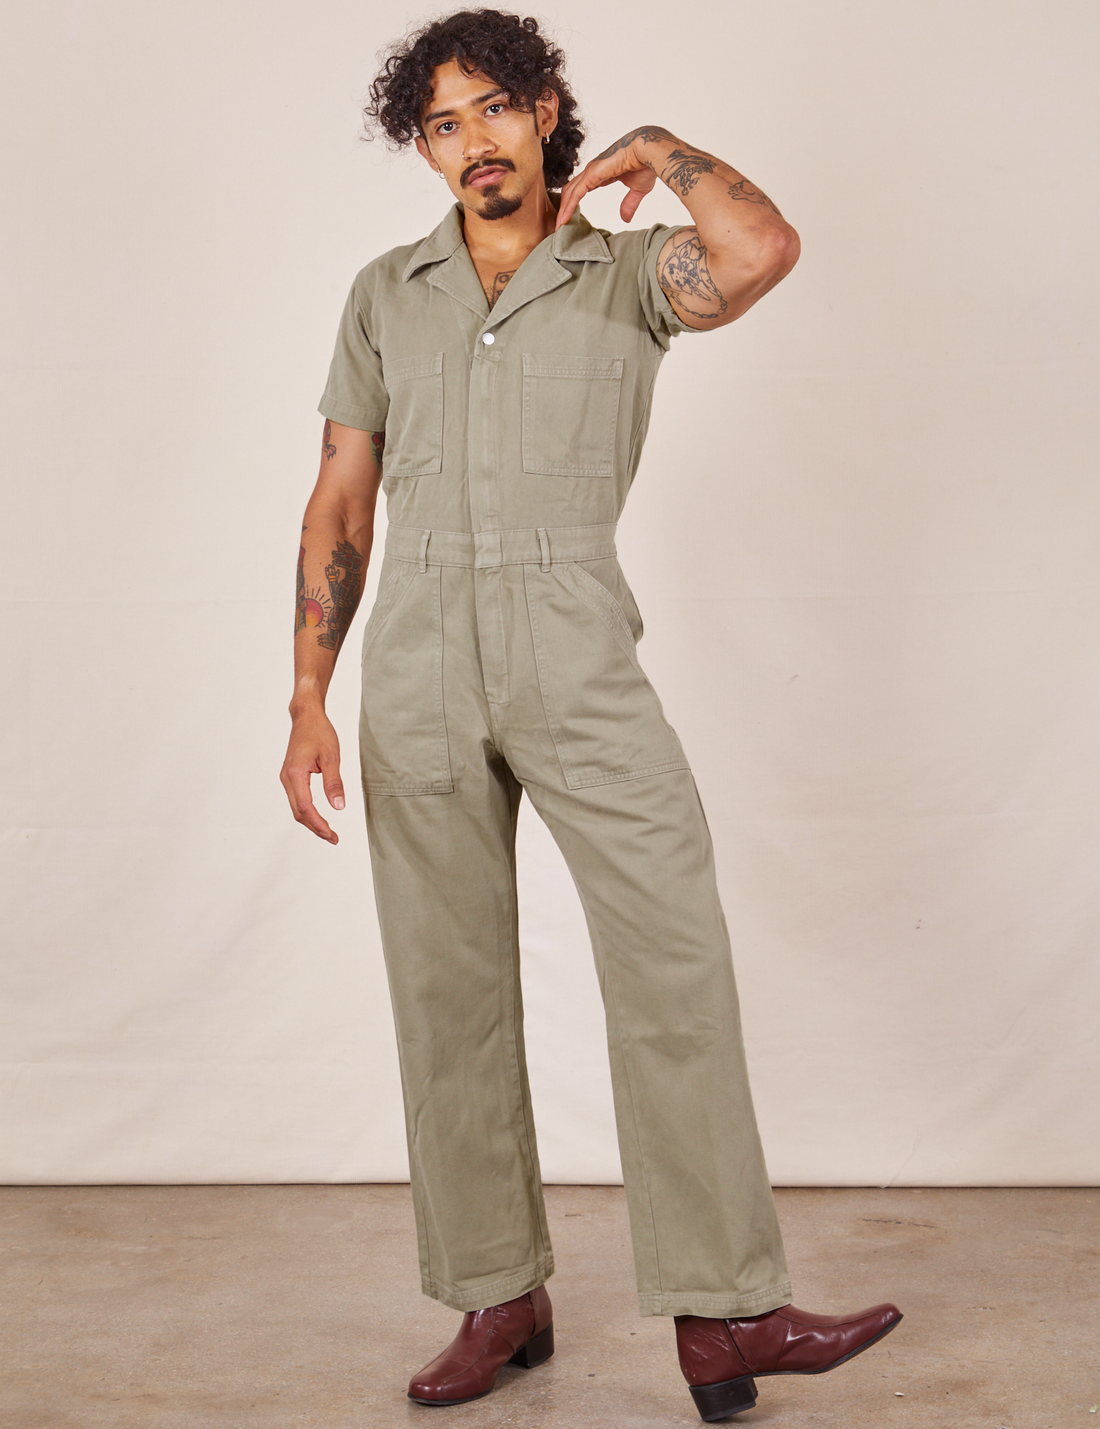 Jesse is 5'7" and wearing S Short Sleeve Jumpsuit in Khaki Grey